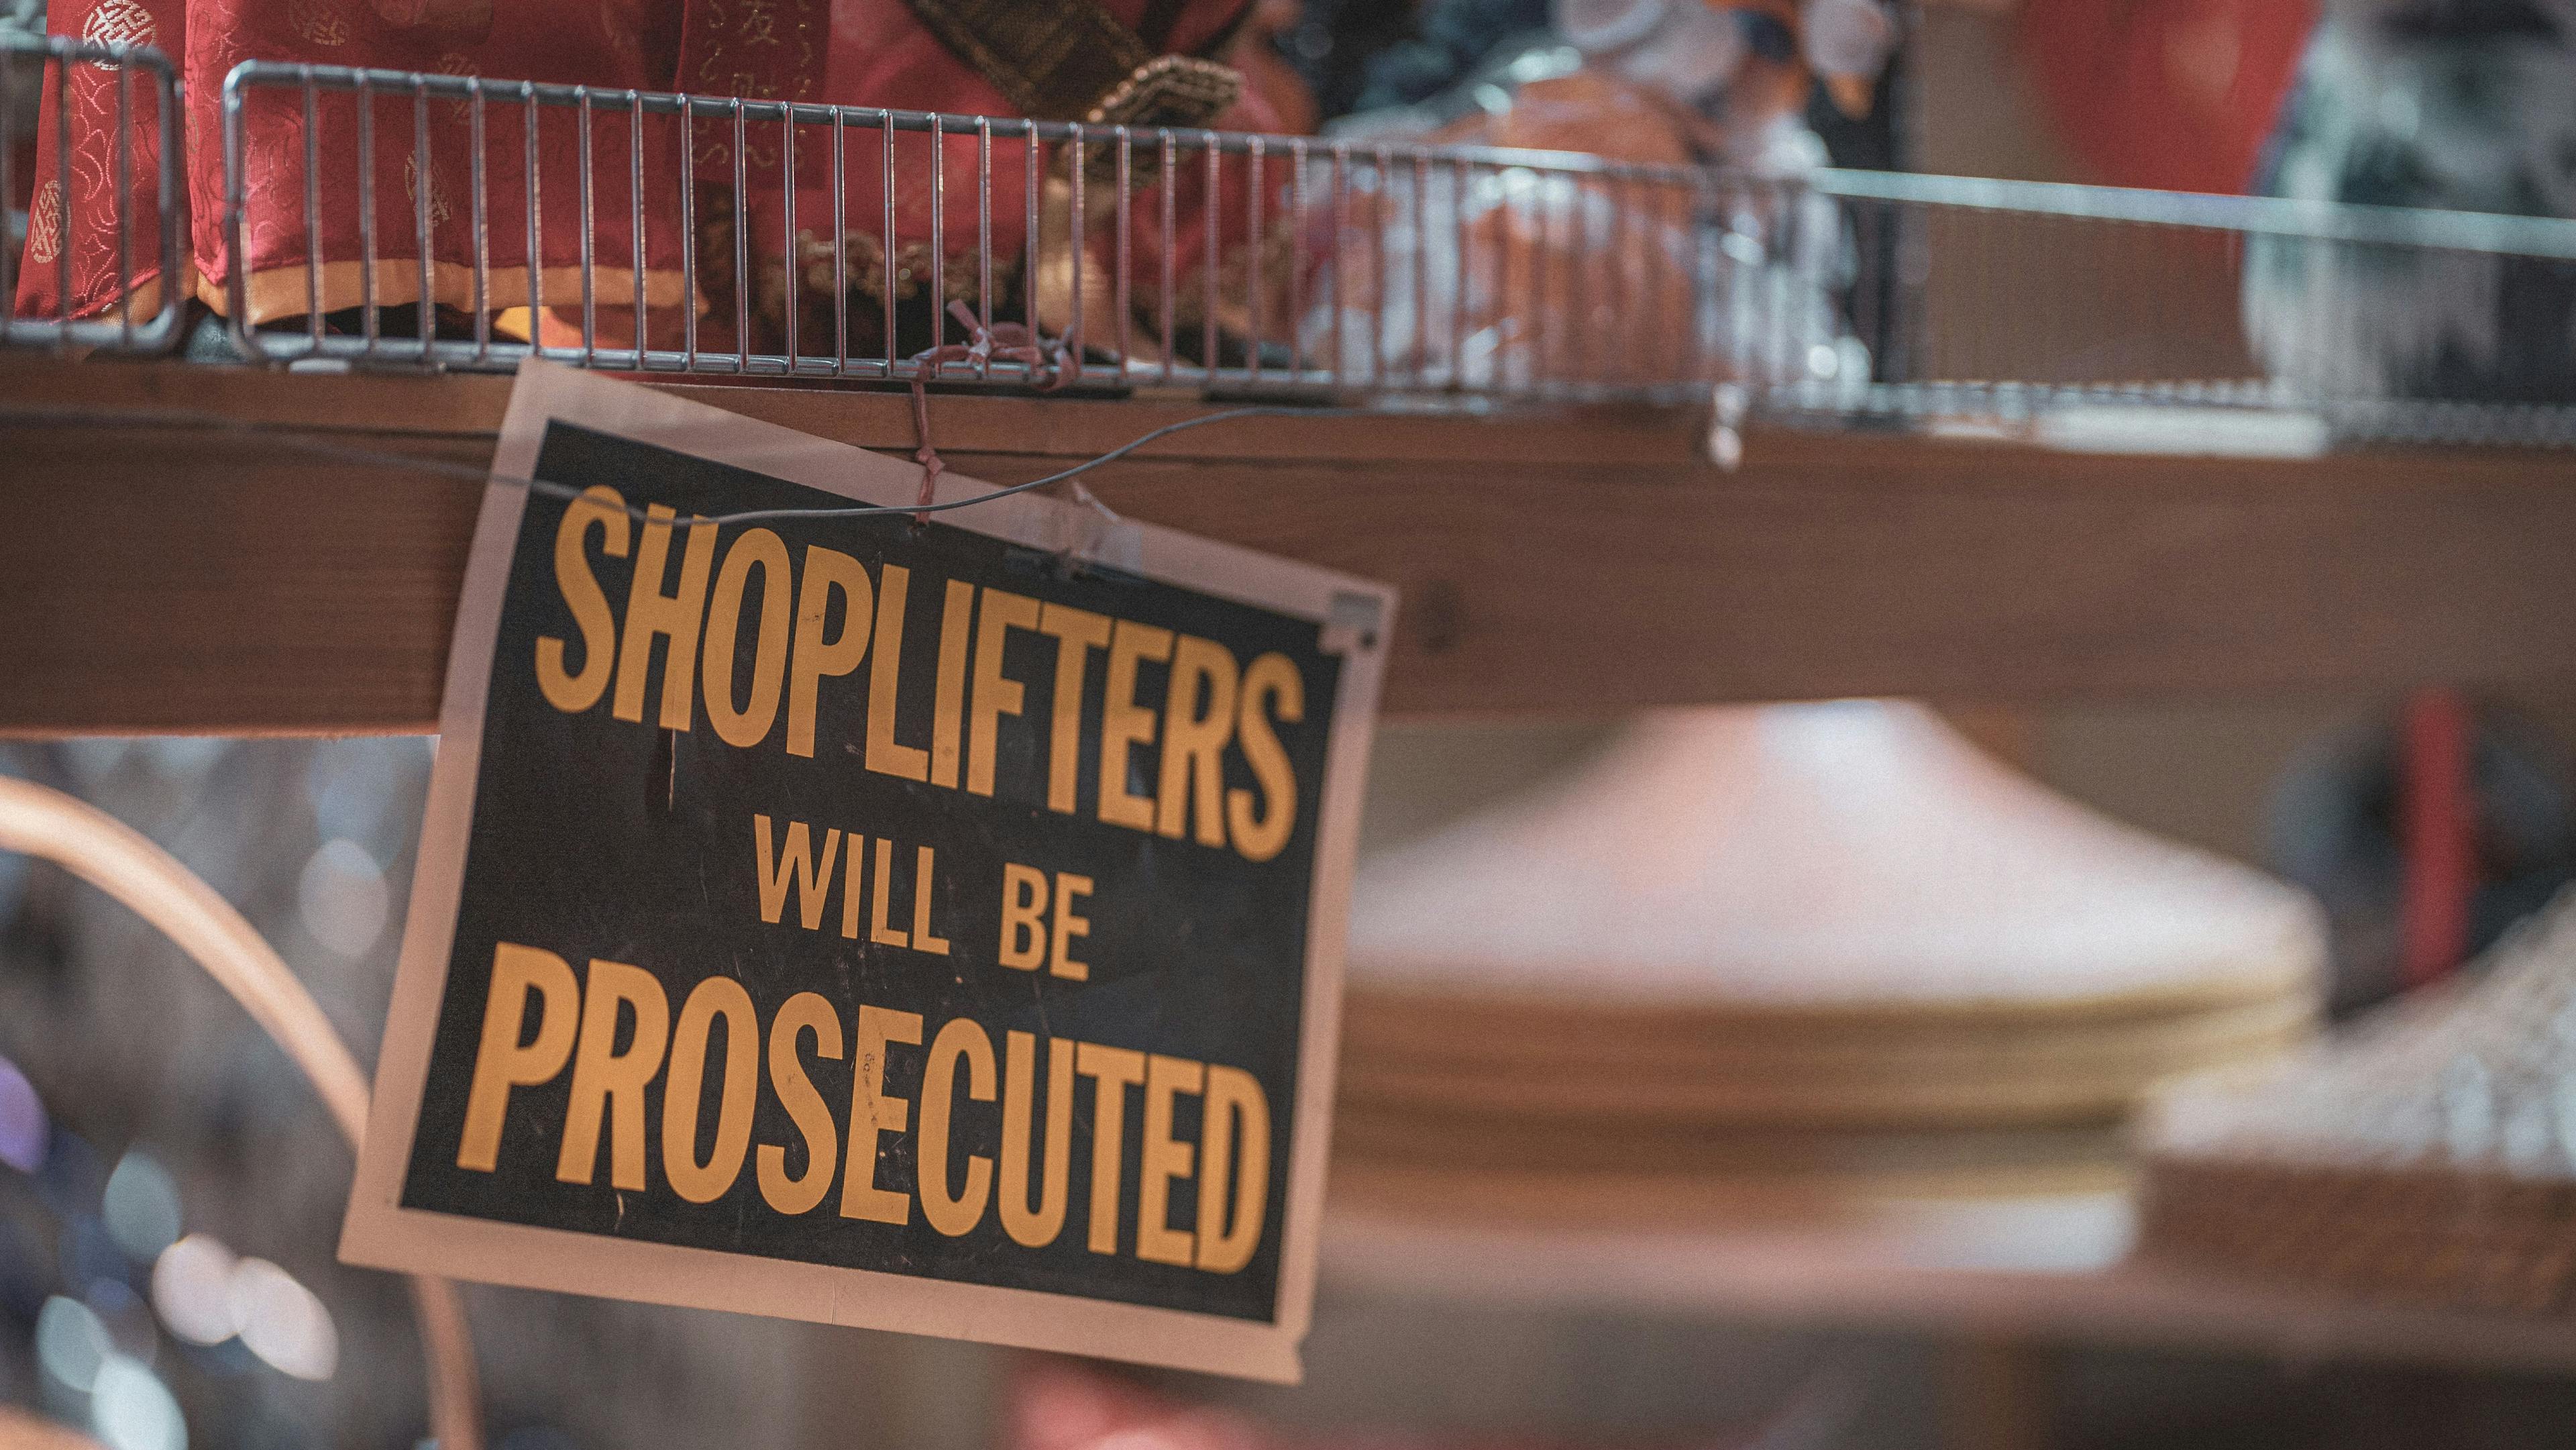 A sign in a store that says, "Shoplifters will be prosecuted."